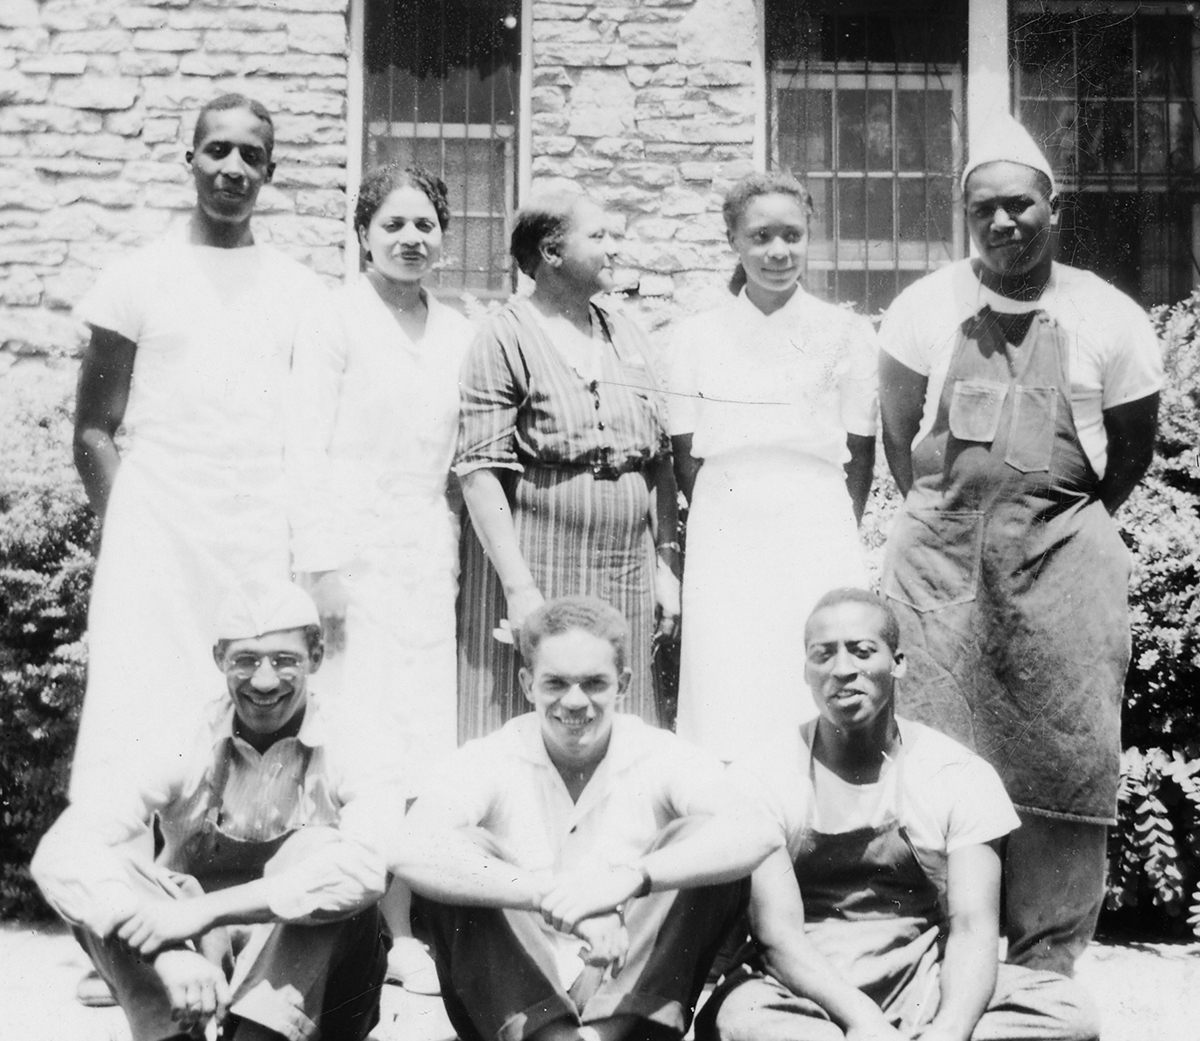 Franklin Shands with fellow black janitors, cooks, and staff in the 1940s.